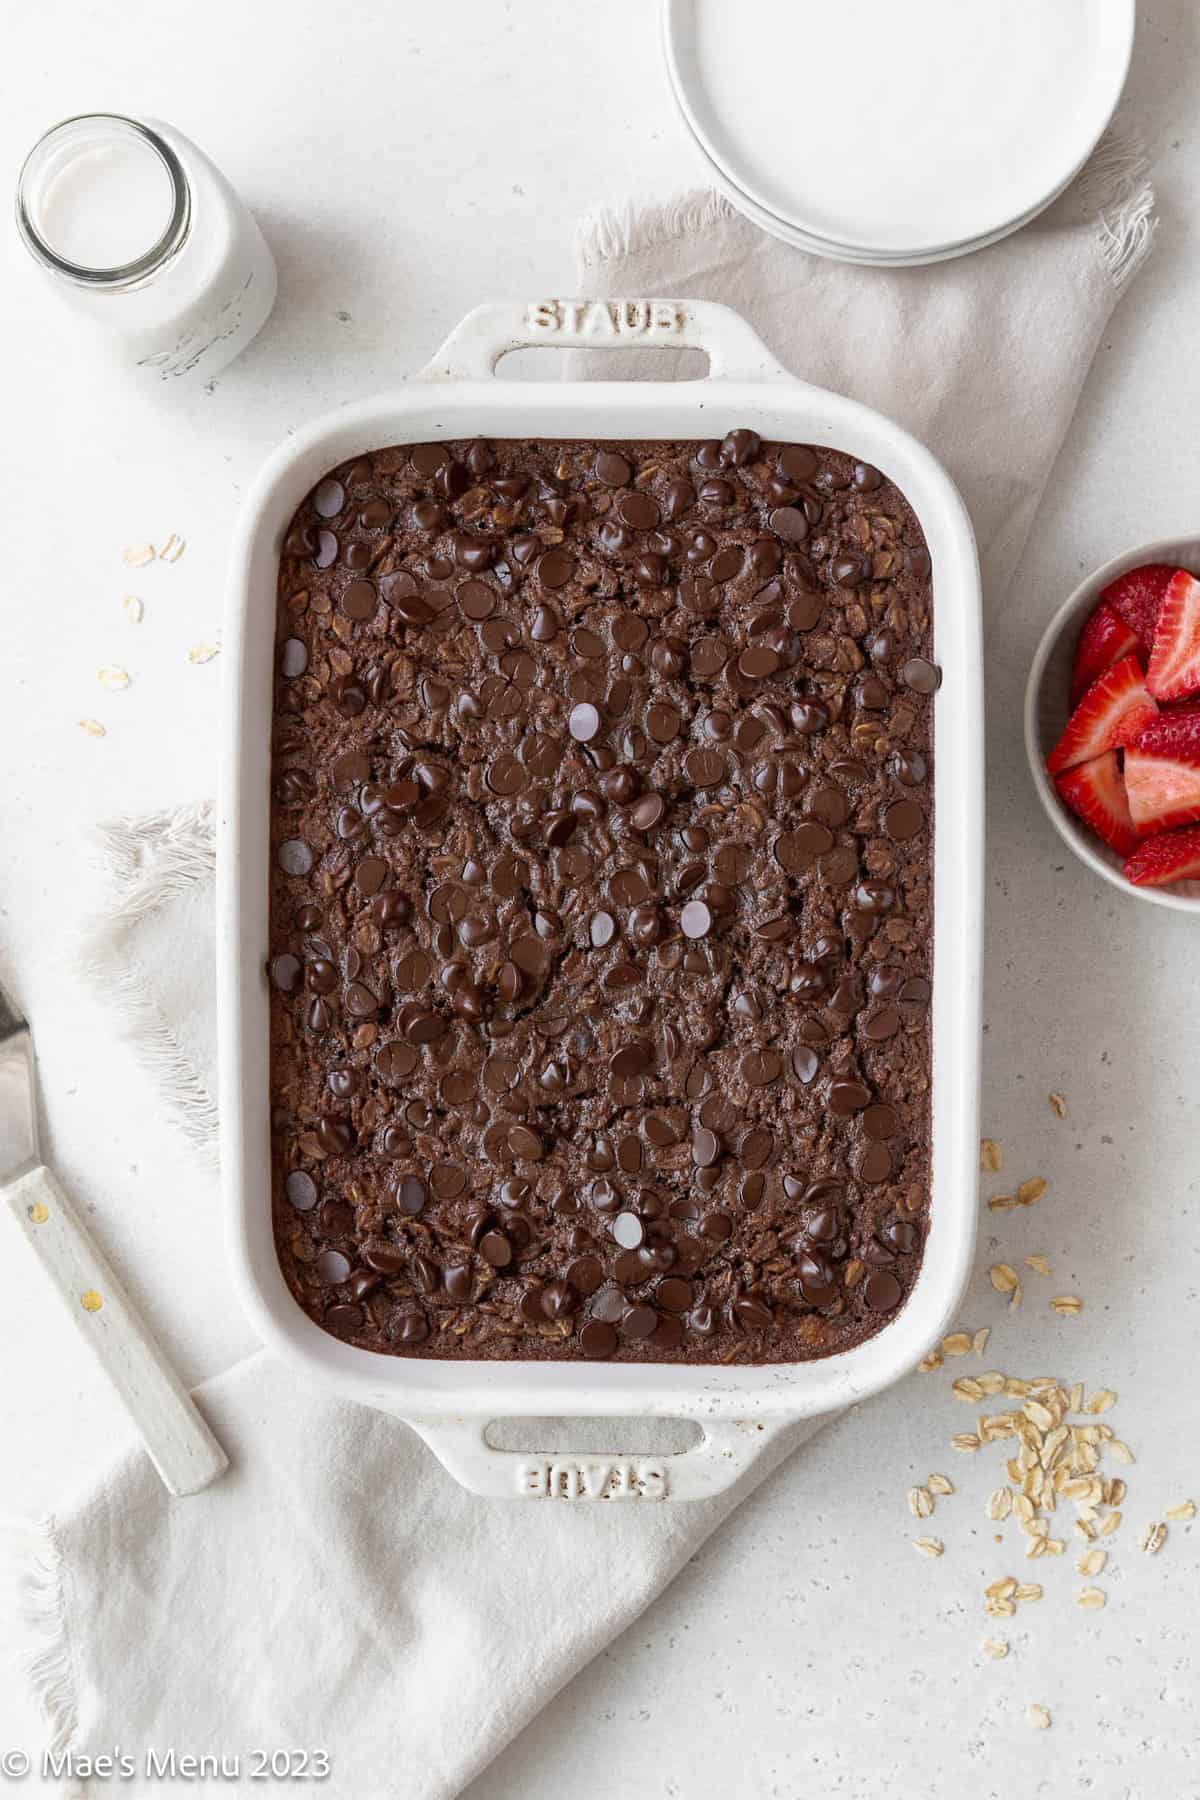 A large white pan of brownie baked oatmeal next to a bowl of strawberries, stack of white plates, oats, and jar of milk.